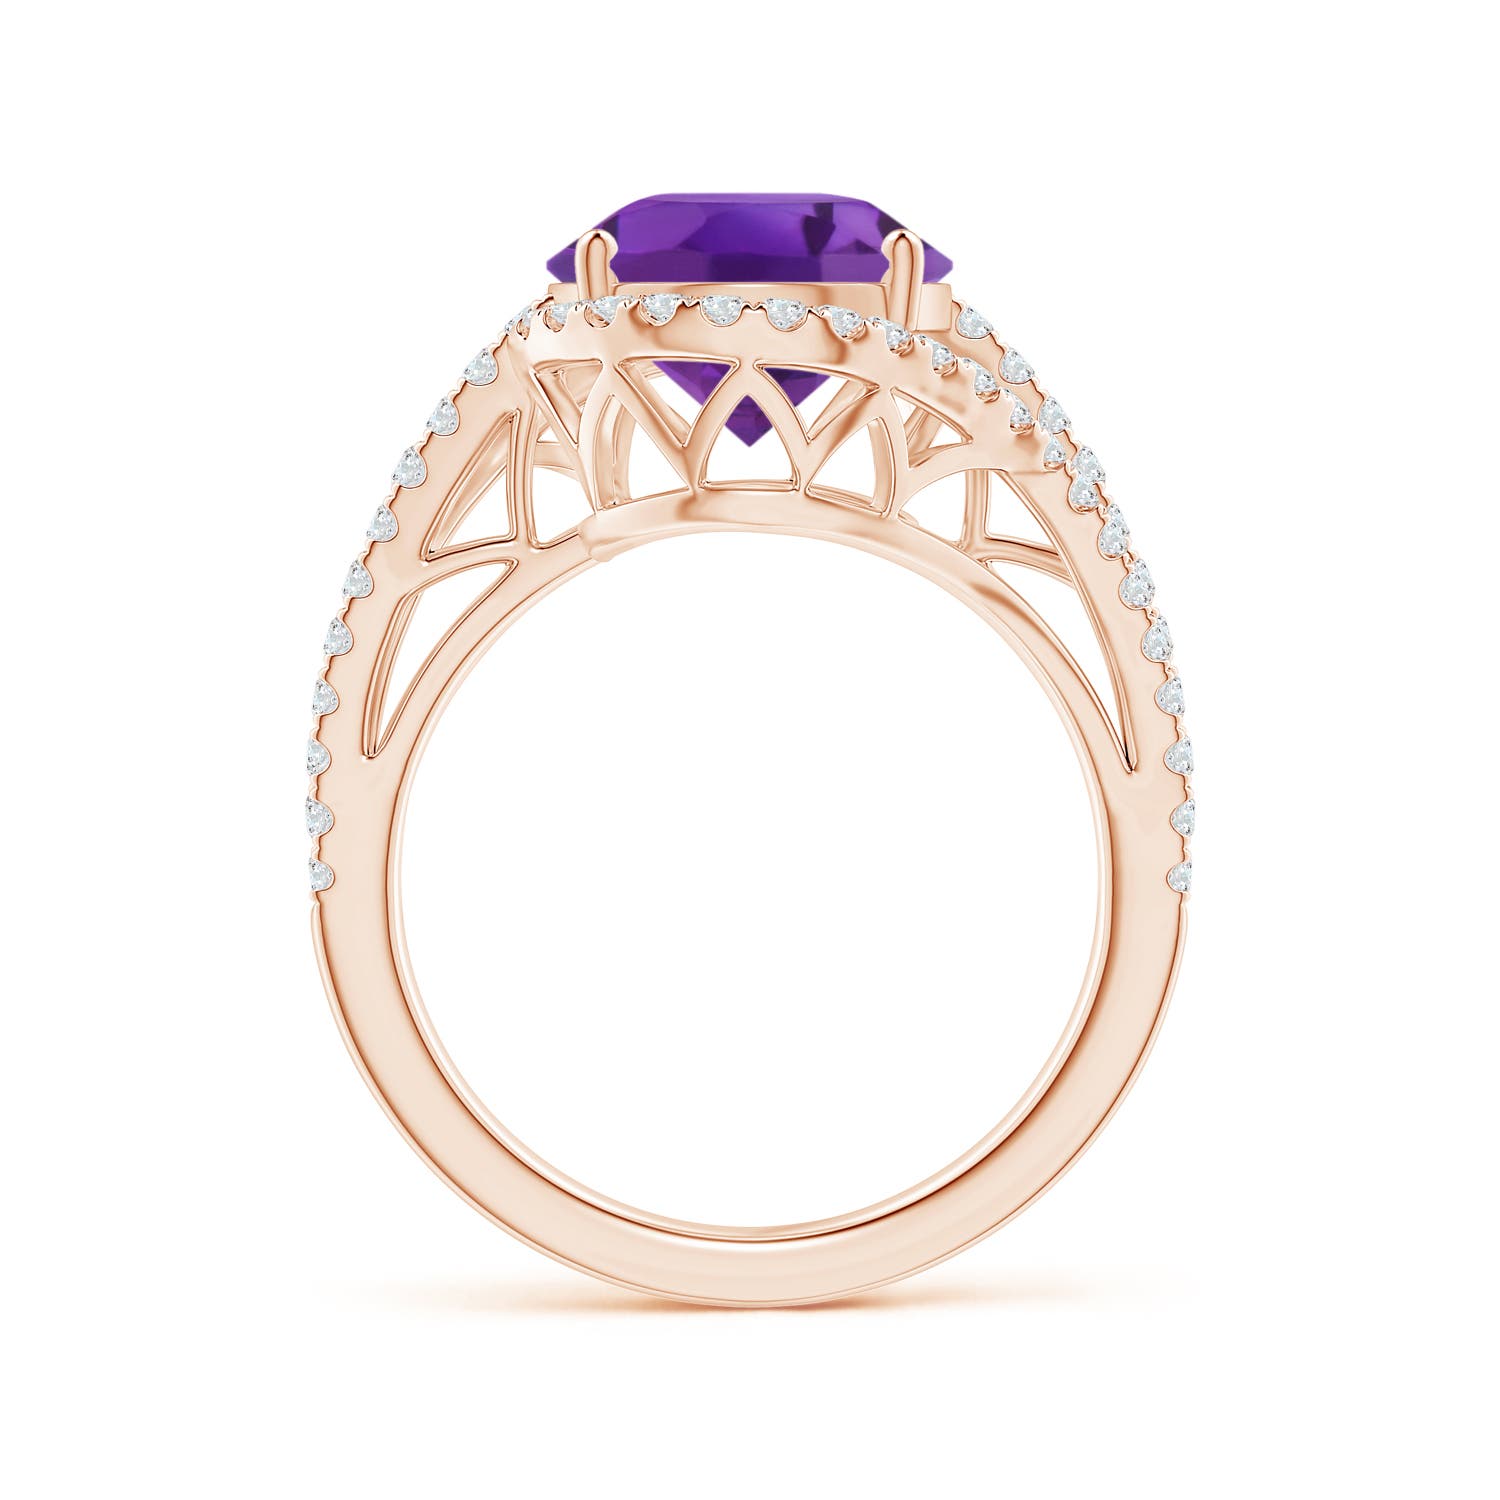 AAA - Amethyst / 4.92 CT / 14 KT Rose Gold